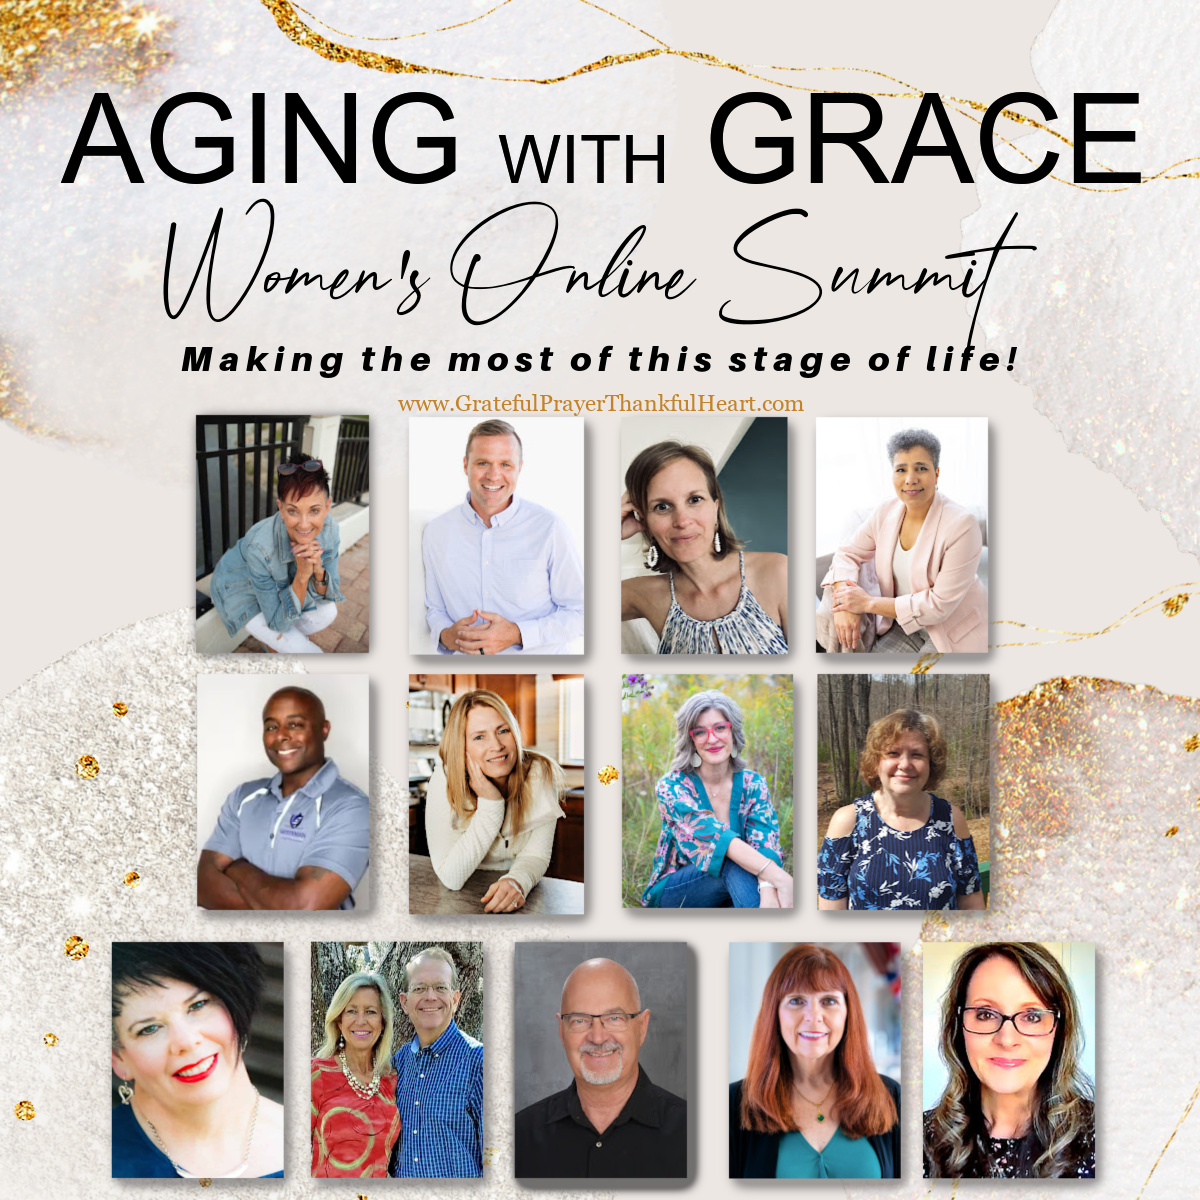 Aging with Grace Women's Online Summit: Making the Best of the Stage of Life!